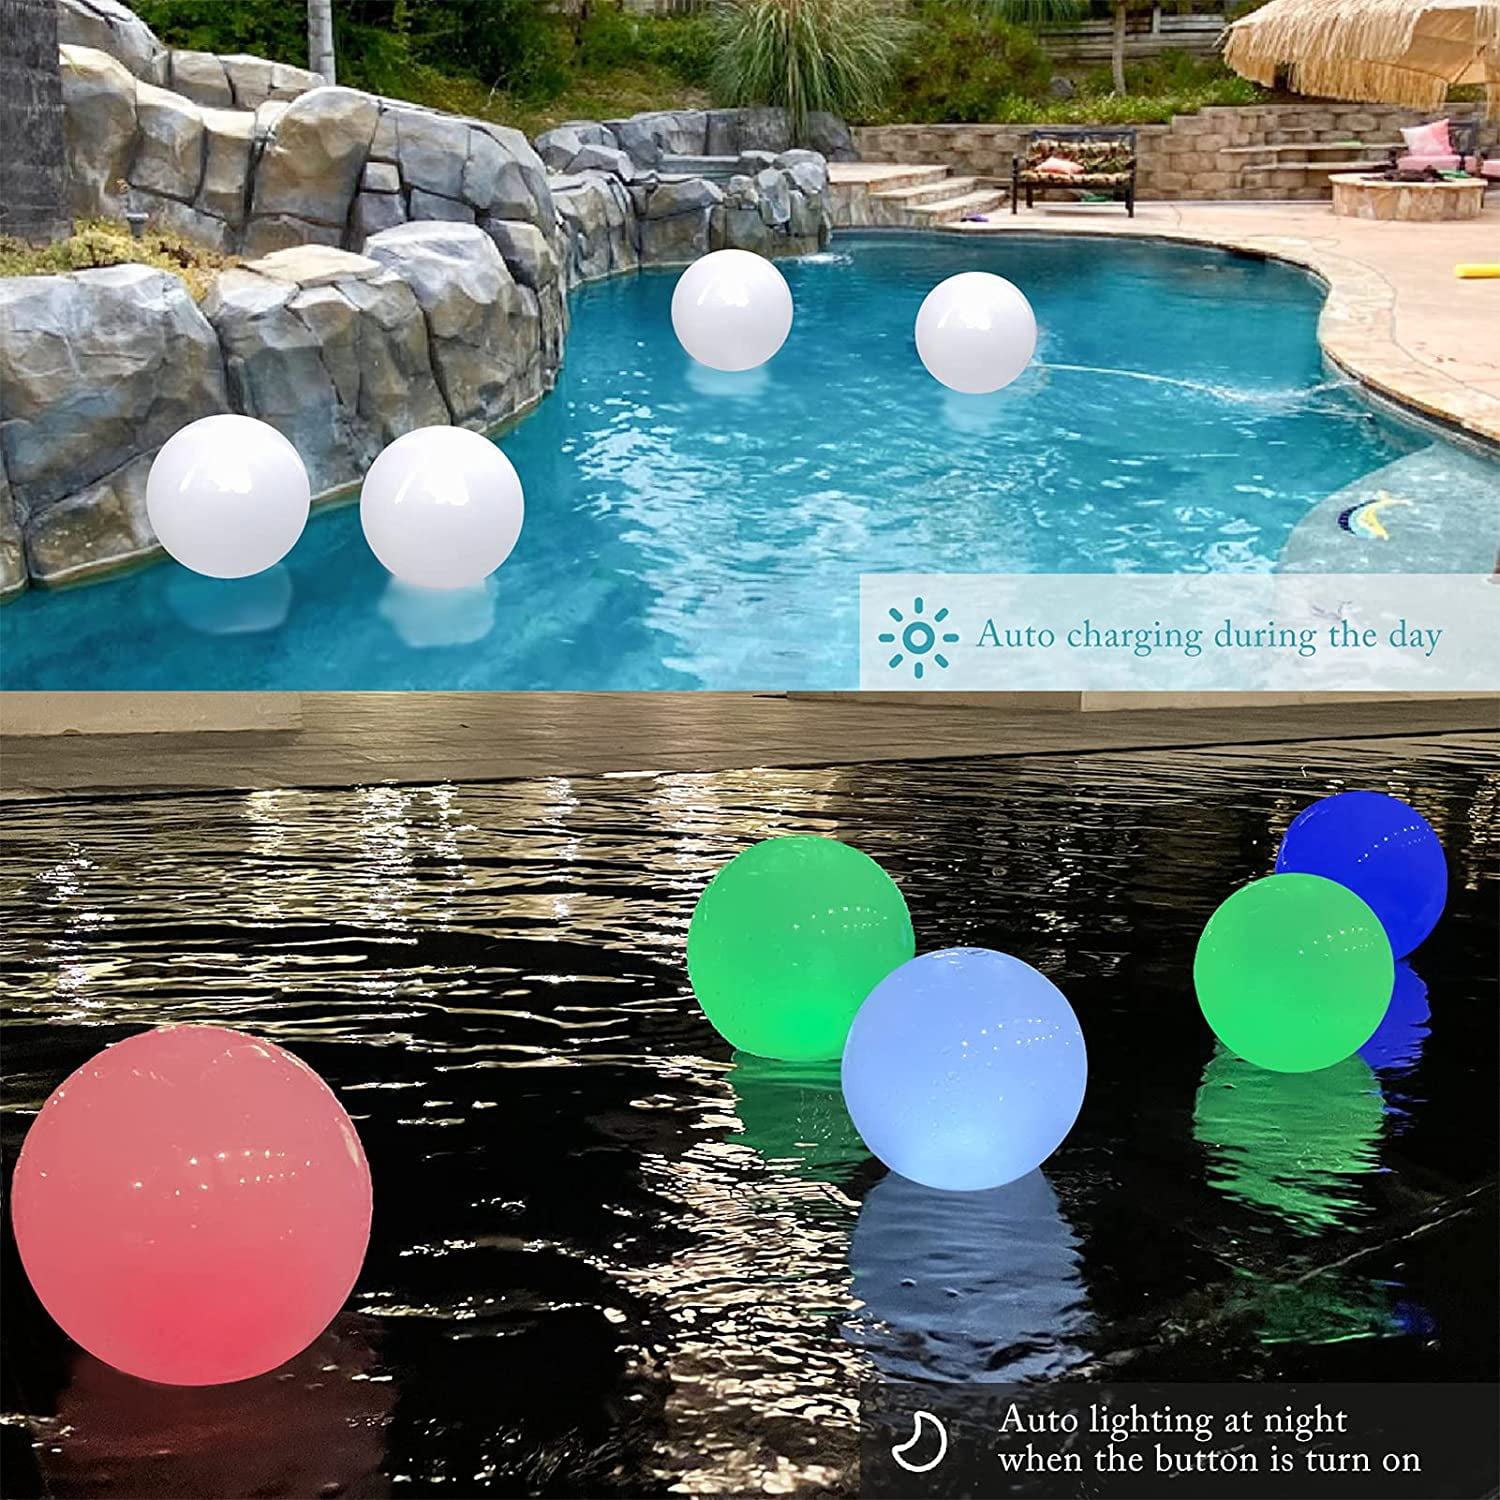 Floating Pool Light Ball 2PCS Glow Led Pool Ball Lights for Hot Tub,Pond,Bathtub,Spa RGB Color Changing Bath Hot Tub Light IP68 Waterproof Orb Light up Ball for Kids Gift Decor Outdoor Indoor 